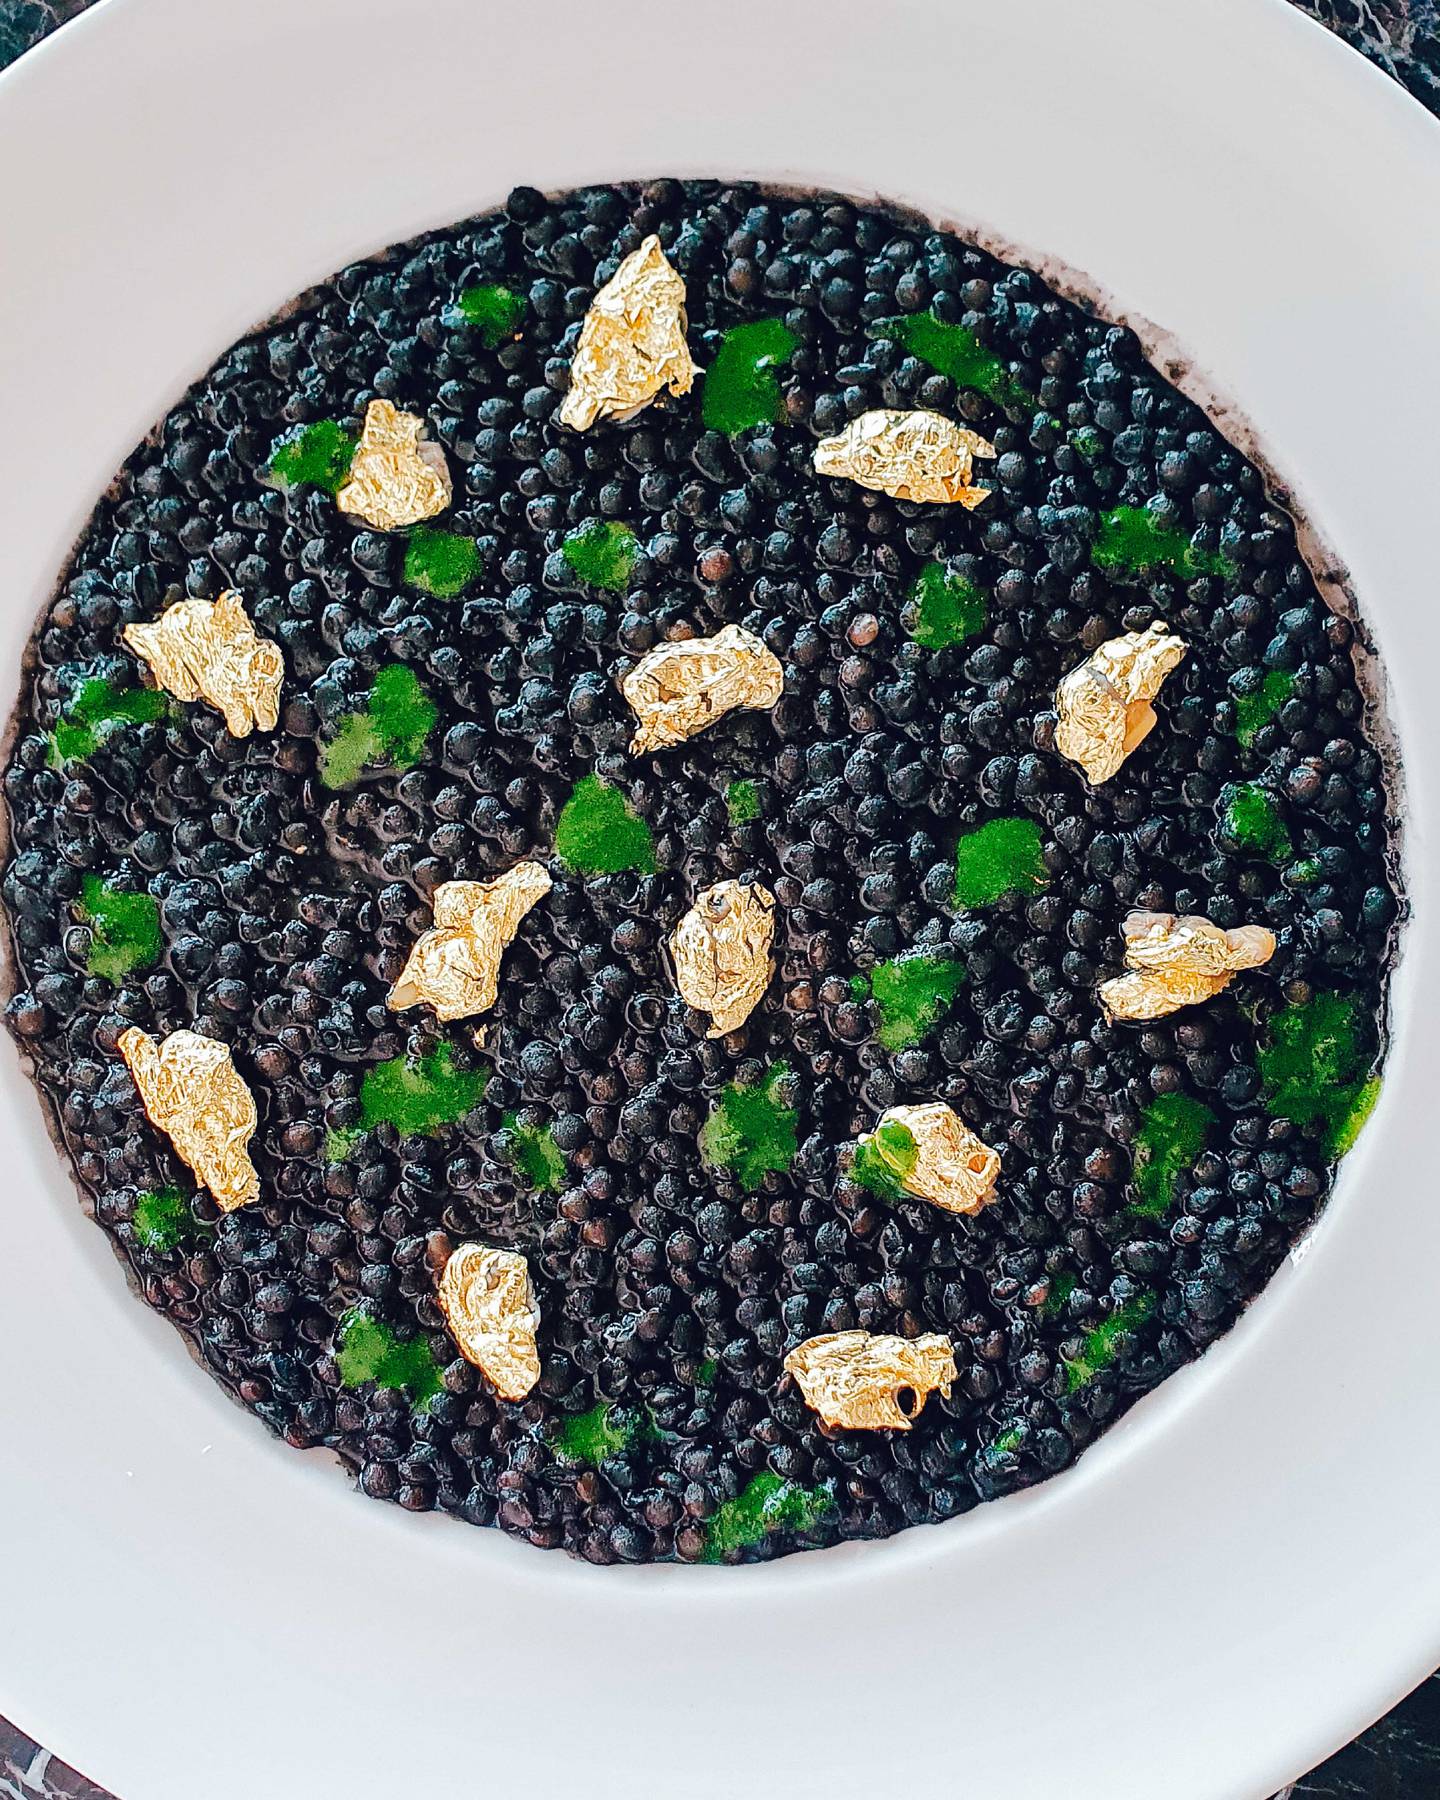 A lentil risotto, garnished with gold, will be served at the exclusive 50-hands chef dinner at Expo 2020. Photo: Jubilee Gastronomy